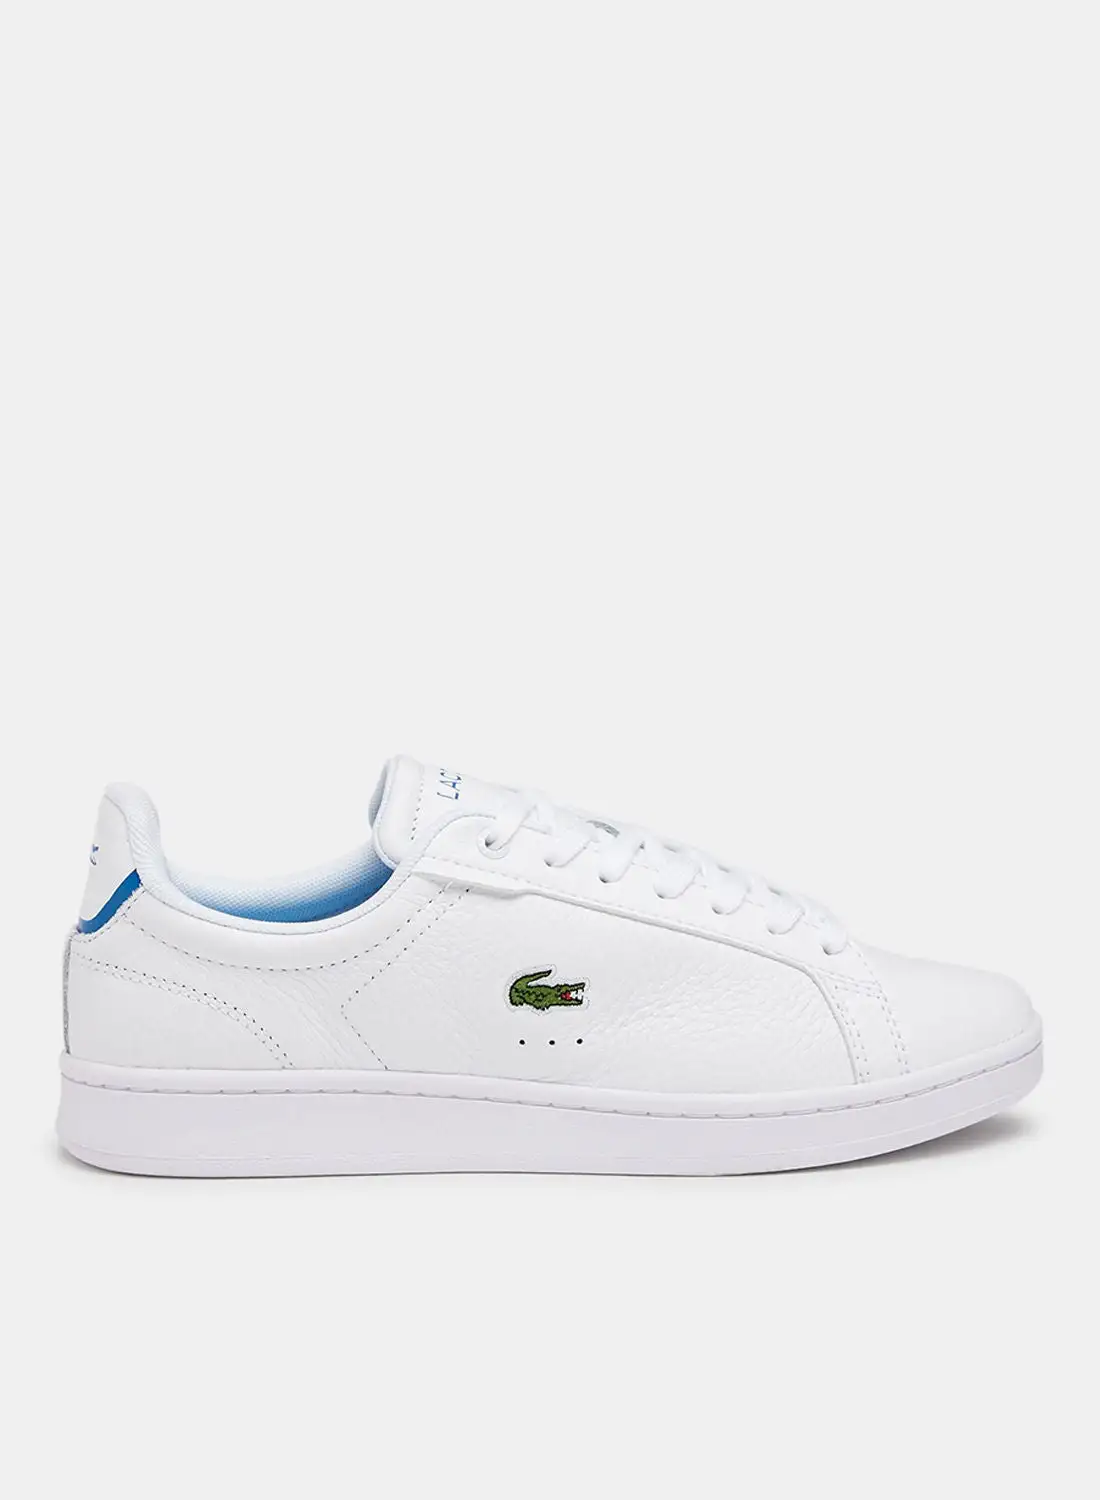 LACOSTE Carnaby Pro Sneakers